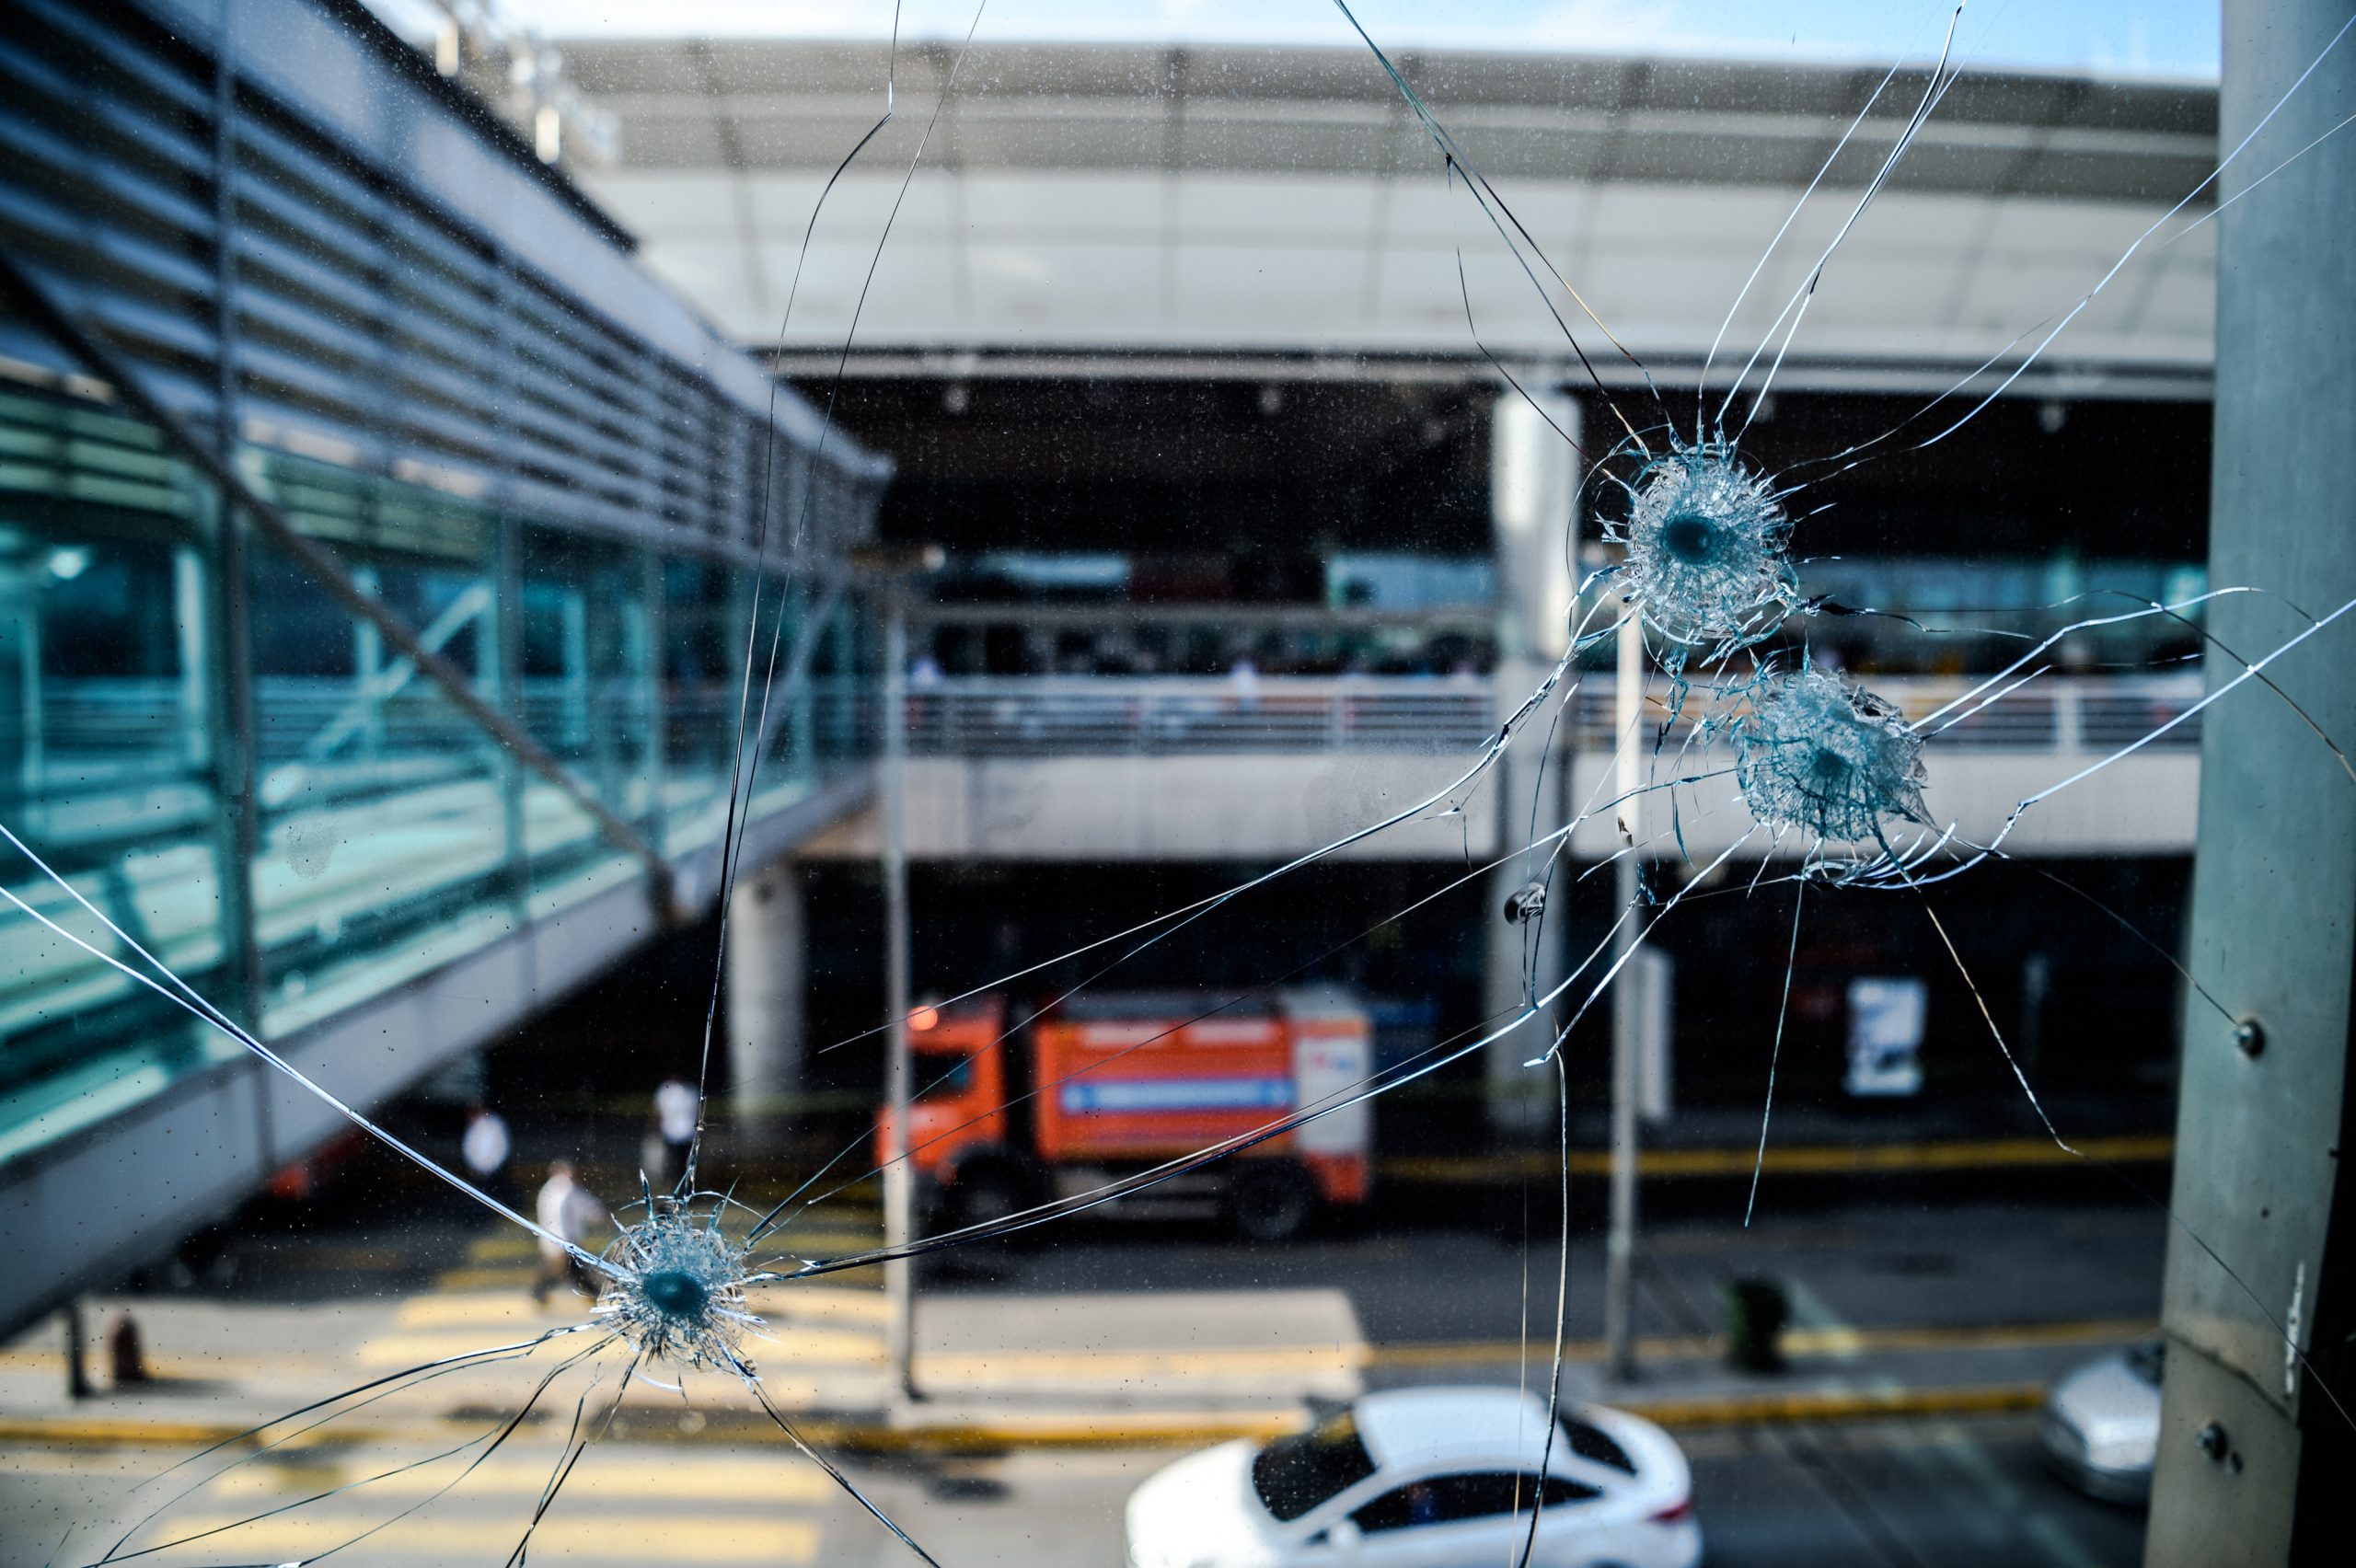 Bullet impacts are pictured at Istanbul's Ataturk airport on Wednesday, a day after a suicide bombing and gun attack killed more than 40 people.